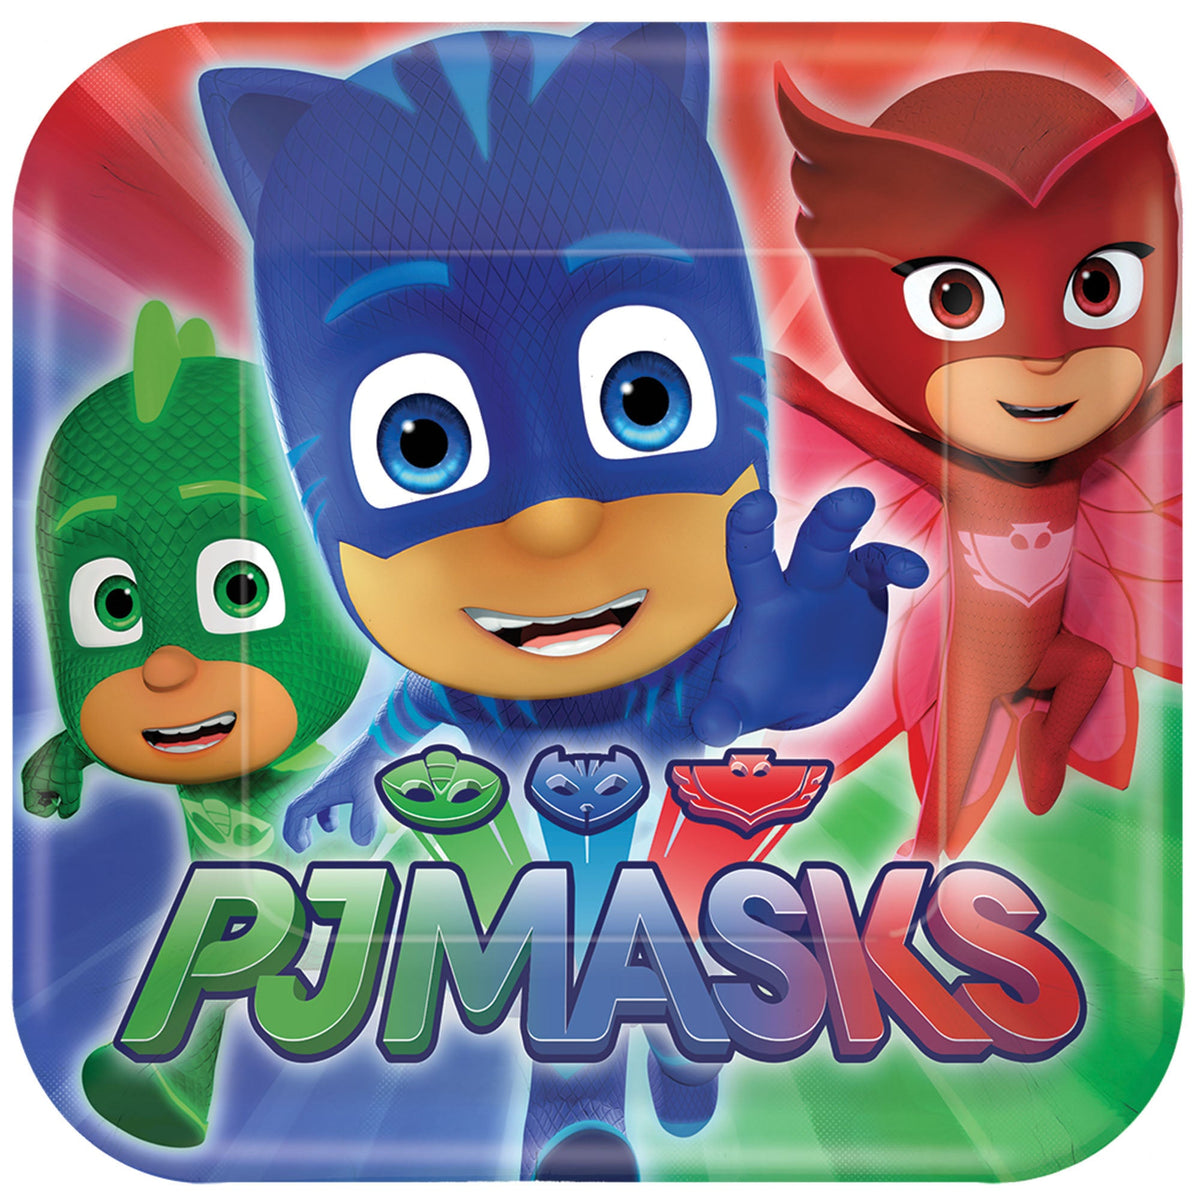 PJ Masks 7" Square Plates Package of 8